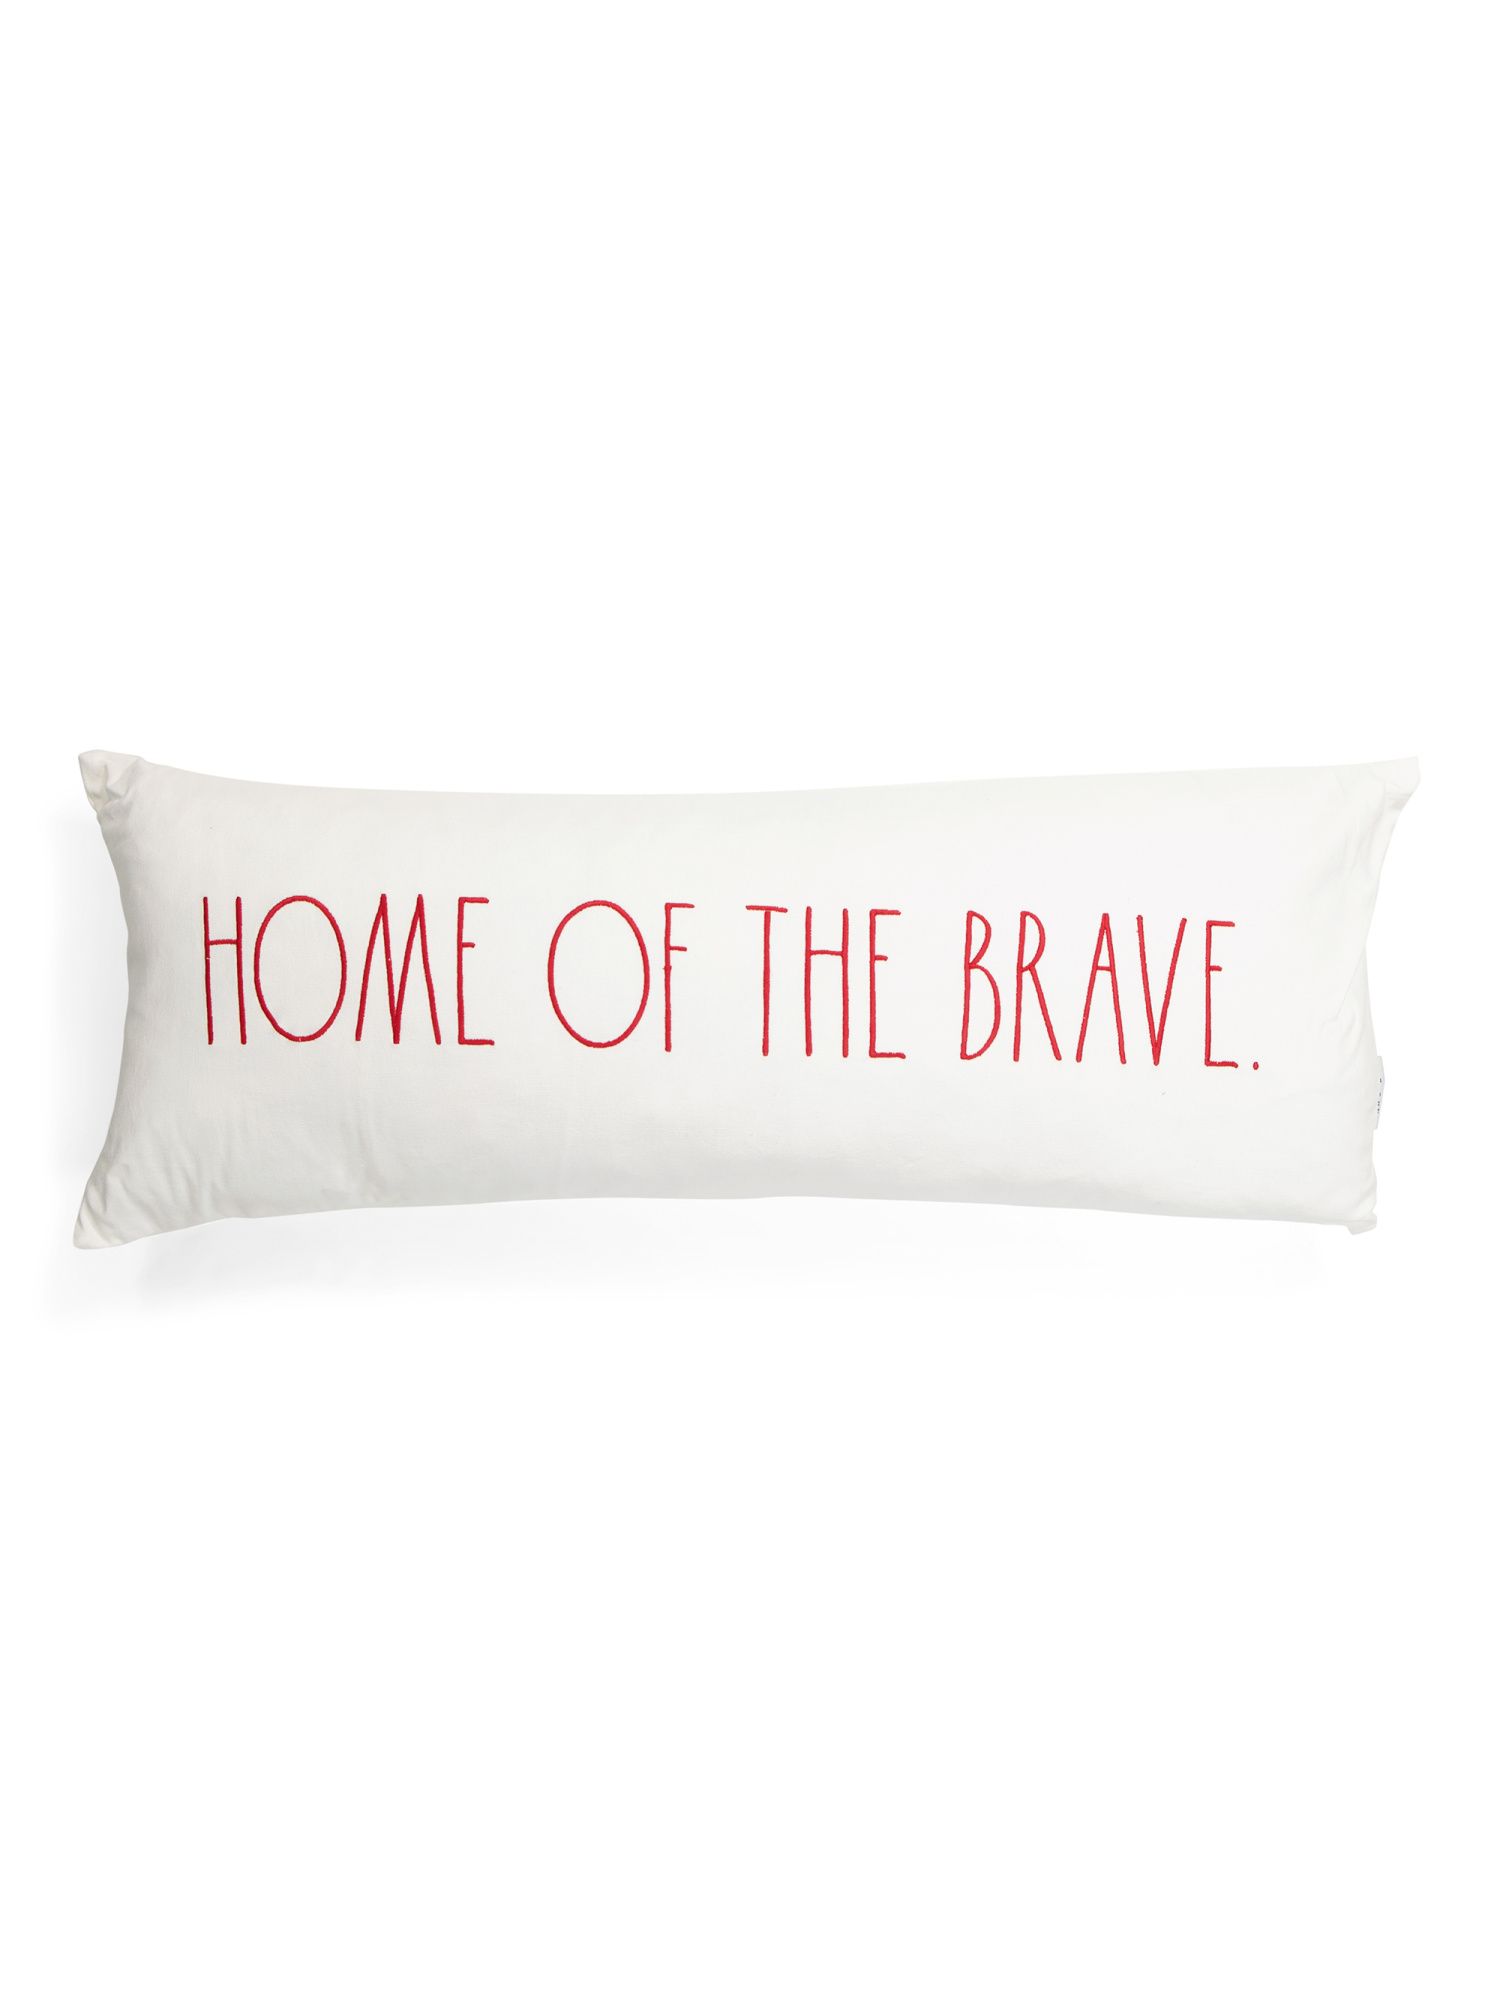 14x35 Home Of The Brave Pillow | TJ Maxx